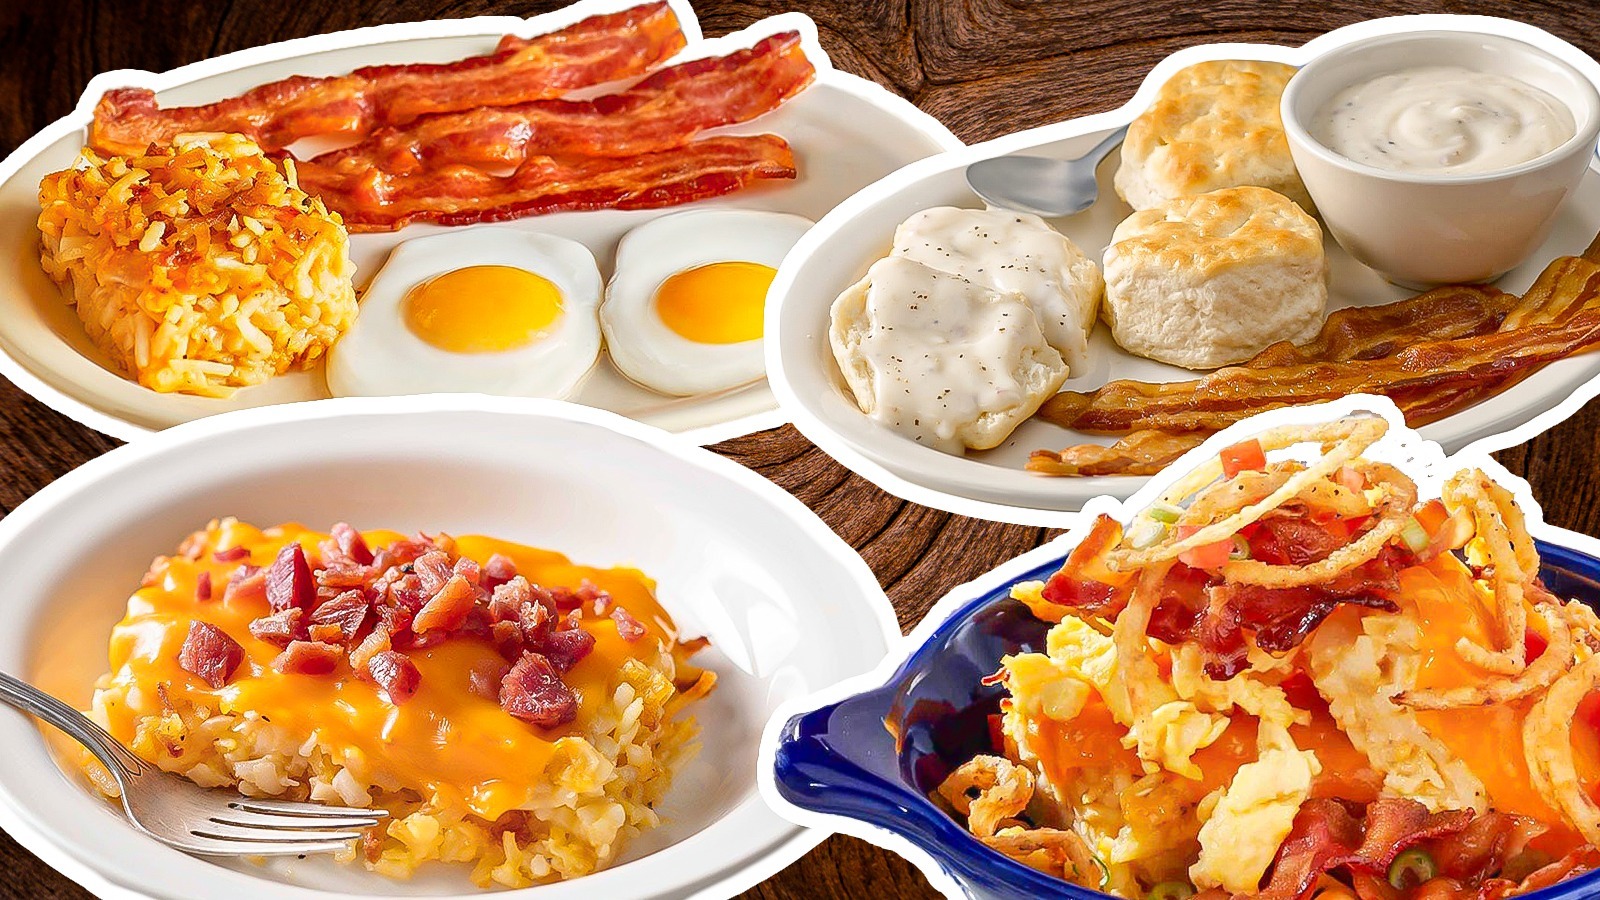 When Does Cracker Barrel Stop Serving Breakfast: Don't Miss Out!